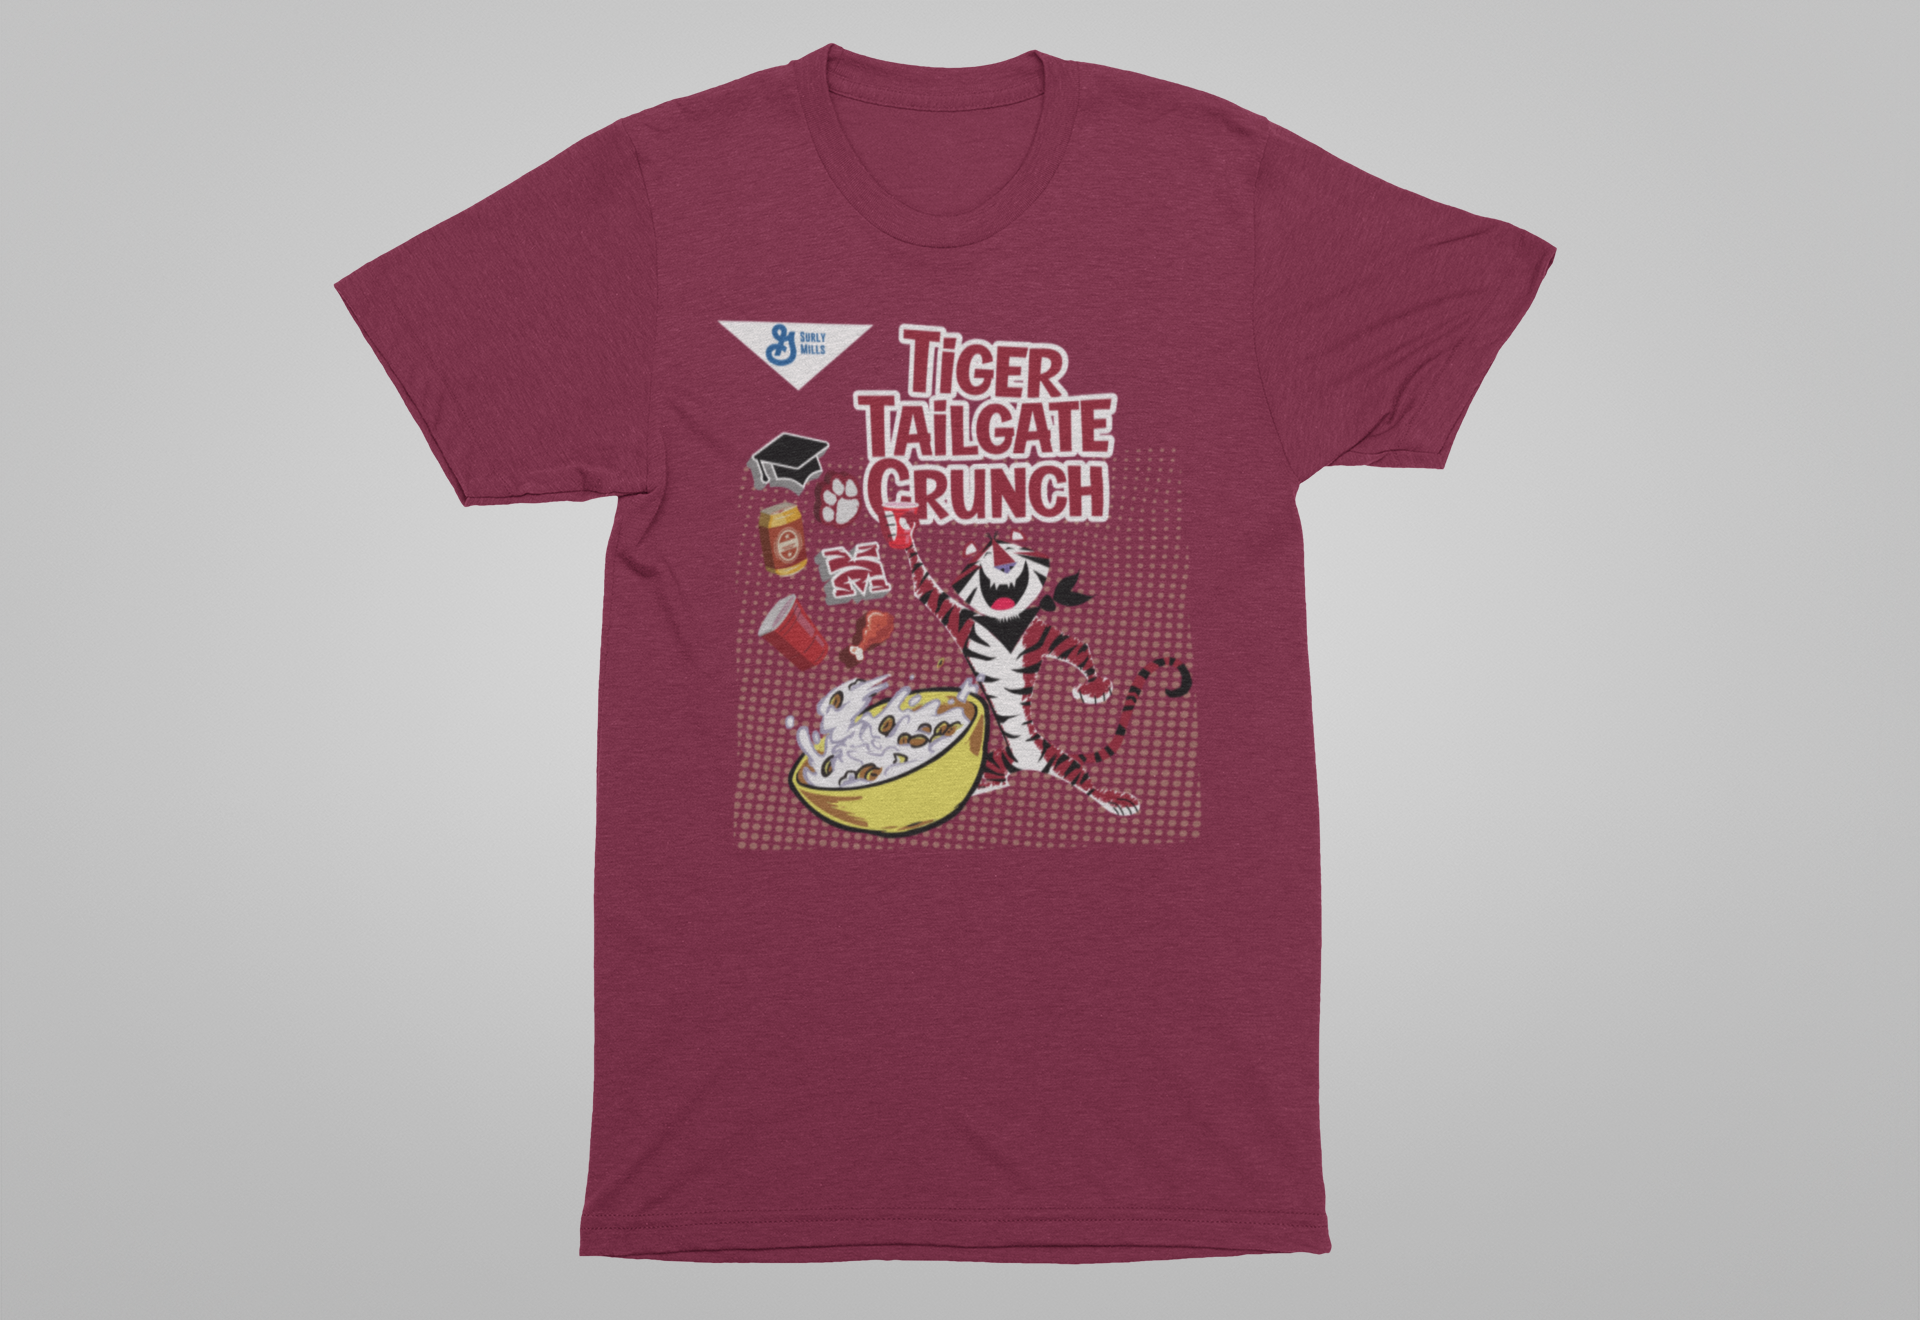 Tiger Tailgate Crunch Tee